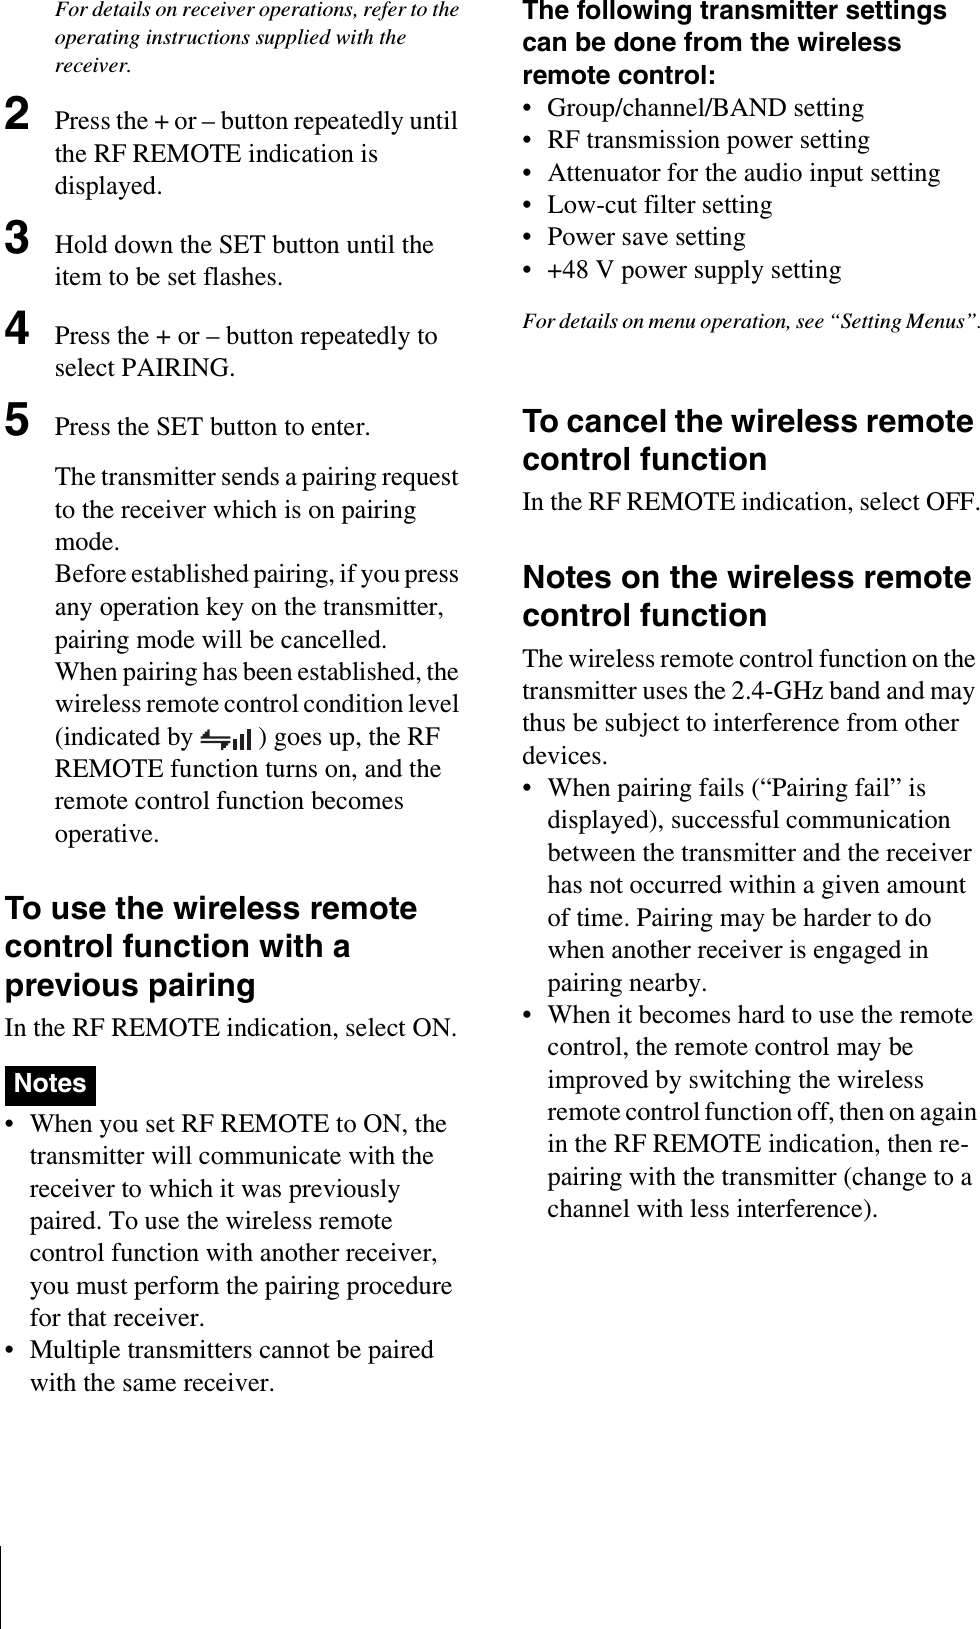 For details on receiver operations, refer to the operating instructions supplied with the receiver.2Press the + or – button repeatedly until the RF REMOTE indication is displayed.3Hold down the SET button until the item to be set flashes.4Press the + or – button repeatedly to select PAIRING.5Press the SET button to enter.The transmitter sends a pairing request to the receiver which is on pairing mode.Before established pairing, if you press any operation key on the transmitter, pairing mode will be cancelled.When pairing has been established, the wireless remote control condition level (indicated by  ) goes up, the RF REMOTE function turns on, and the remote control function becomes operative.To use the wireless remote control function with a previous pairingIn the RF REMOTE indication, select ON.• When you set RF REMOTE to ON, the transmitter will communicate with the receiver to which it was previously paired. To use the wireless remote control function with another receiver, you must perform the pairing procedure for that receiver.• Multiple transmitters cannot be paired with the same receiver. The following transmitter settings can be done from the wireless remote control:• Group/channel/BAND setting• RF transmission power setting• Attenuator for the audio input setting• Low-cut filter setting• Power save setting• +48 V power supply settingFor details on menu operation, see “Setting Menus”.To cancel the wireless remote control functionIn the RF REMOTE indication, select OFF.Notes on the wireless remote control functionThe wireless remote control function on the transmitter uses the 2.4-GHz band and may thus be subject to interference from other devices.• When pairing fails (“Pairing fail” is displayed), successful communication between the transmitter and the receiver has not occurred within a given amount of time. Pairing may be harder to do when another receiver is engaged in pairing nearby. • When it becomes hard to use the remote control, the remote control may be improved by switching the wireless remote control function off, then on again in the RF REMOTE indication, then re-pairing with the transmitter (change to a channel with less interference).Notes